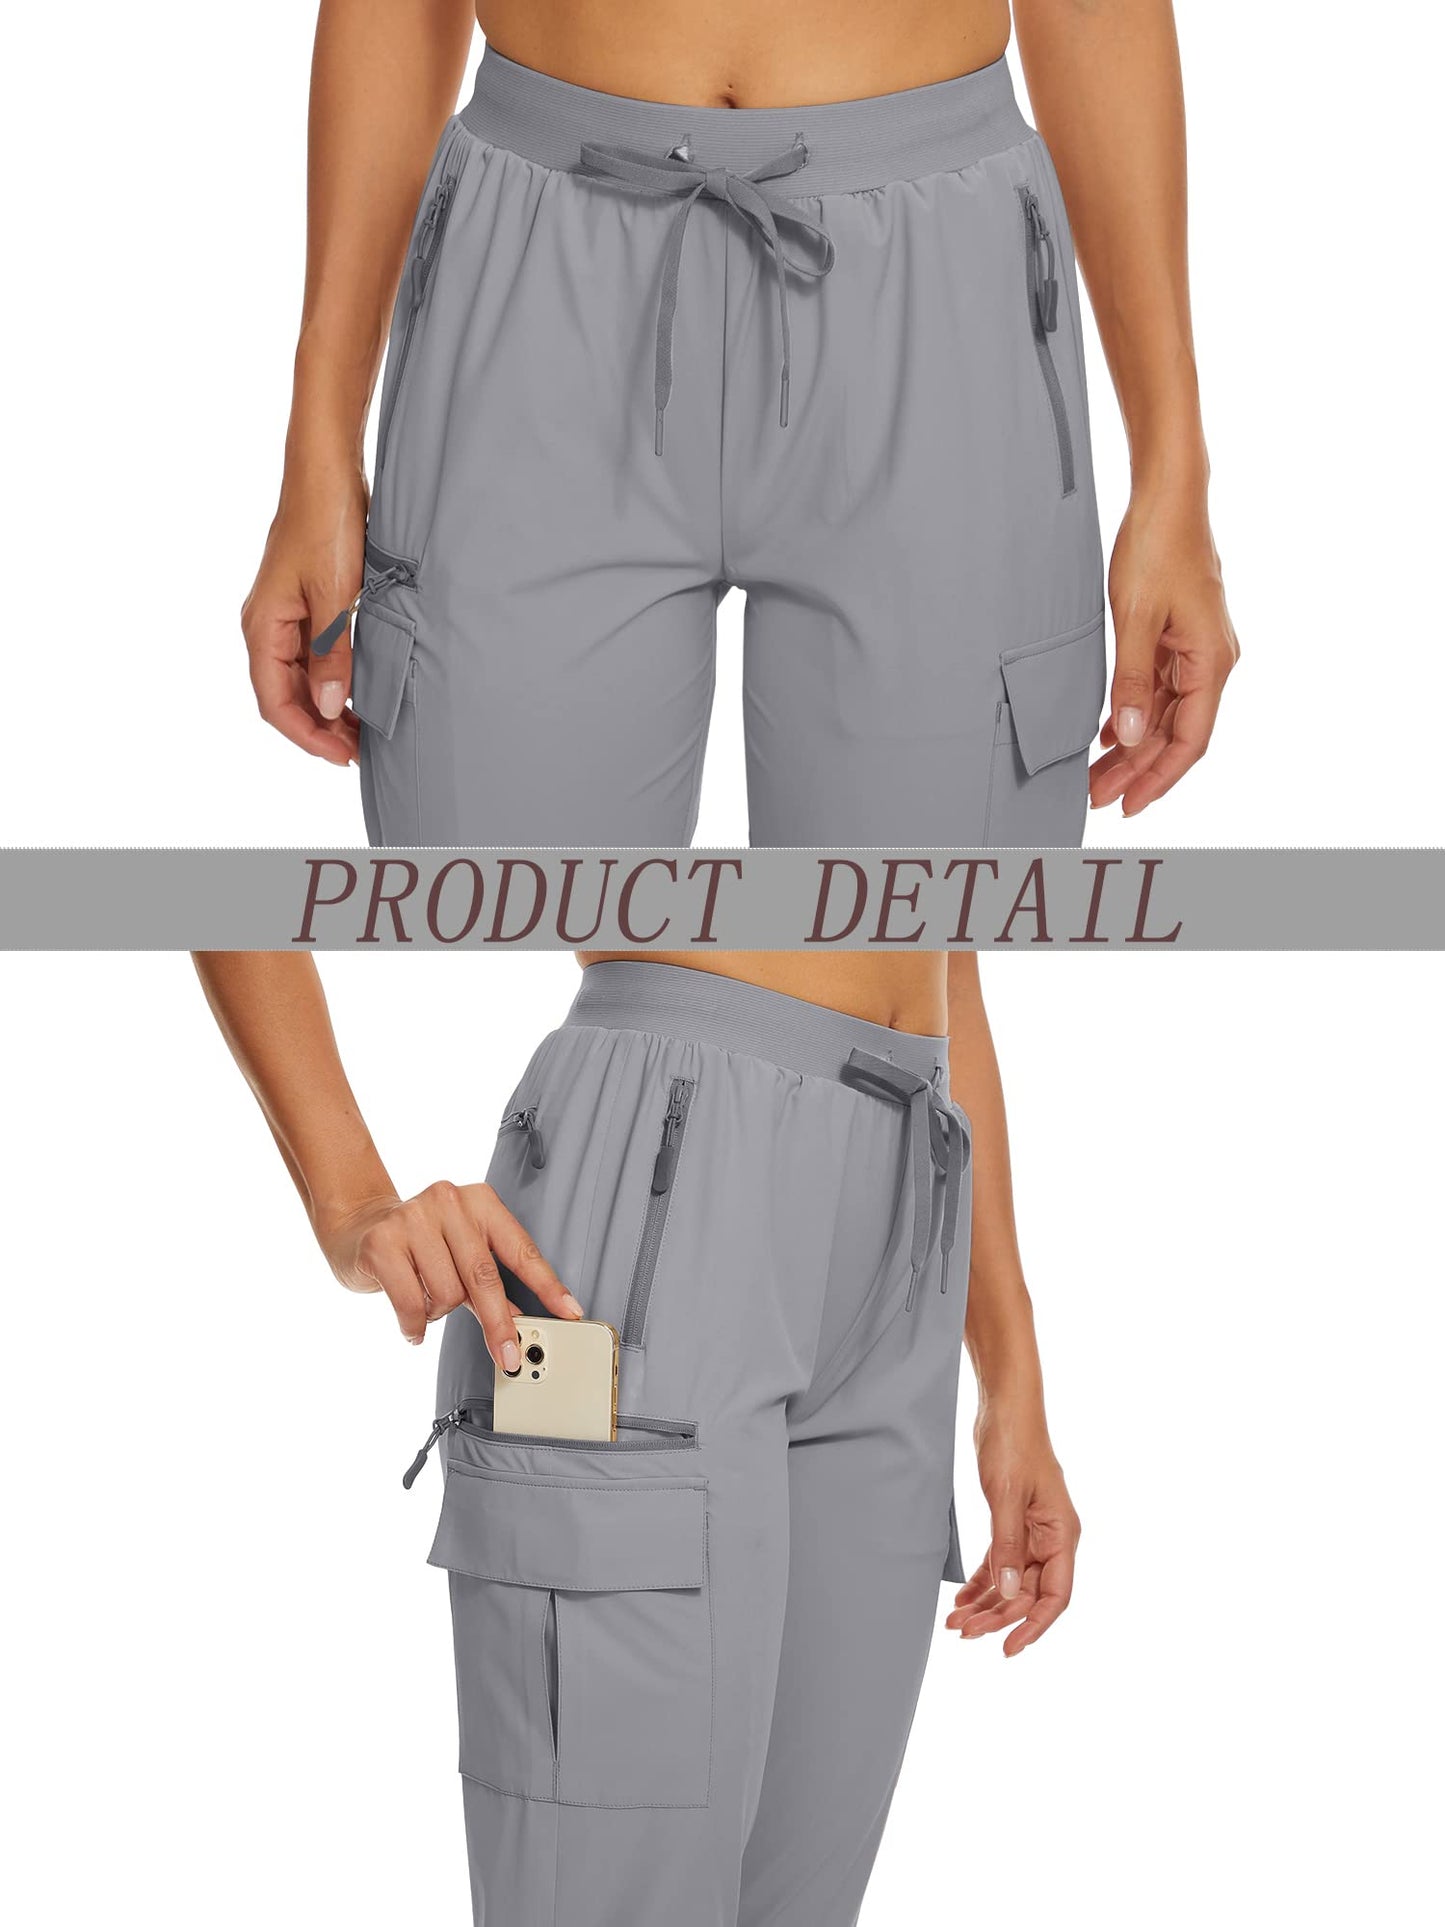 Summer Quick Dry Pants Women's Jogger Sweatpants Lightweight Breathable 6 Pockets Elastic Waist Casual Long Trousers The Clothing Company Sydney